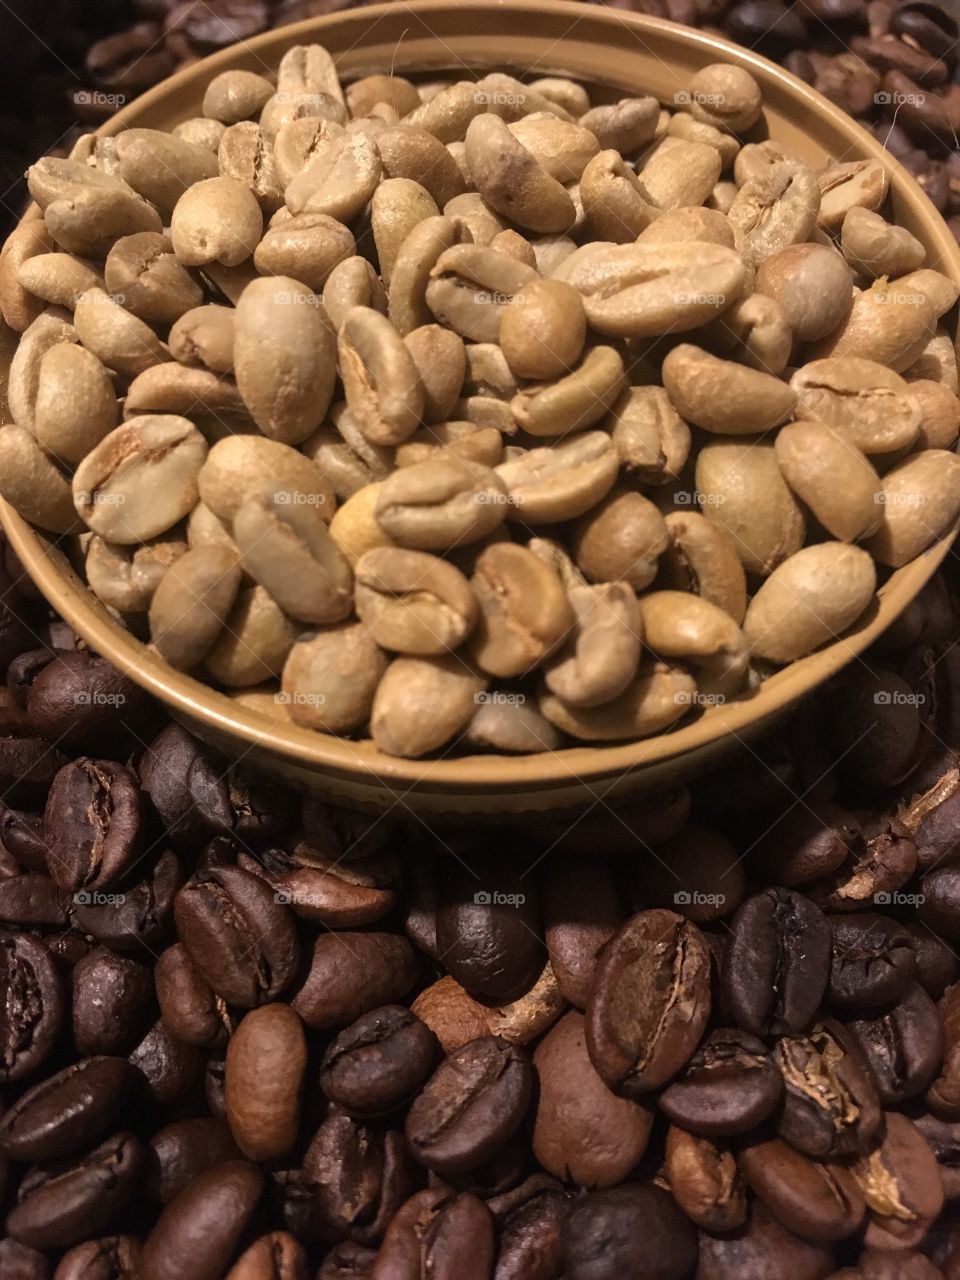 Green and roasted coffee beans. 